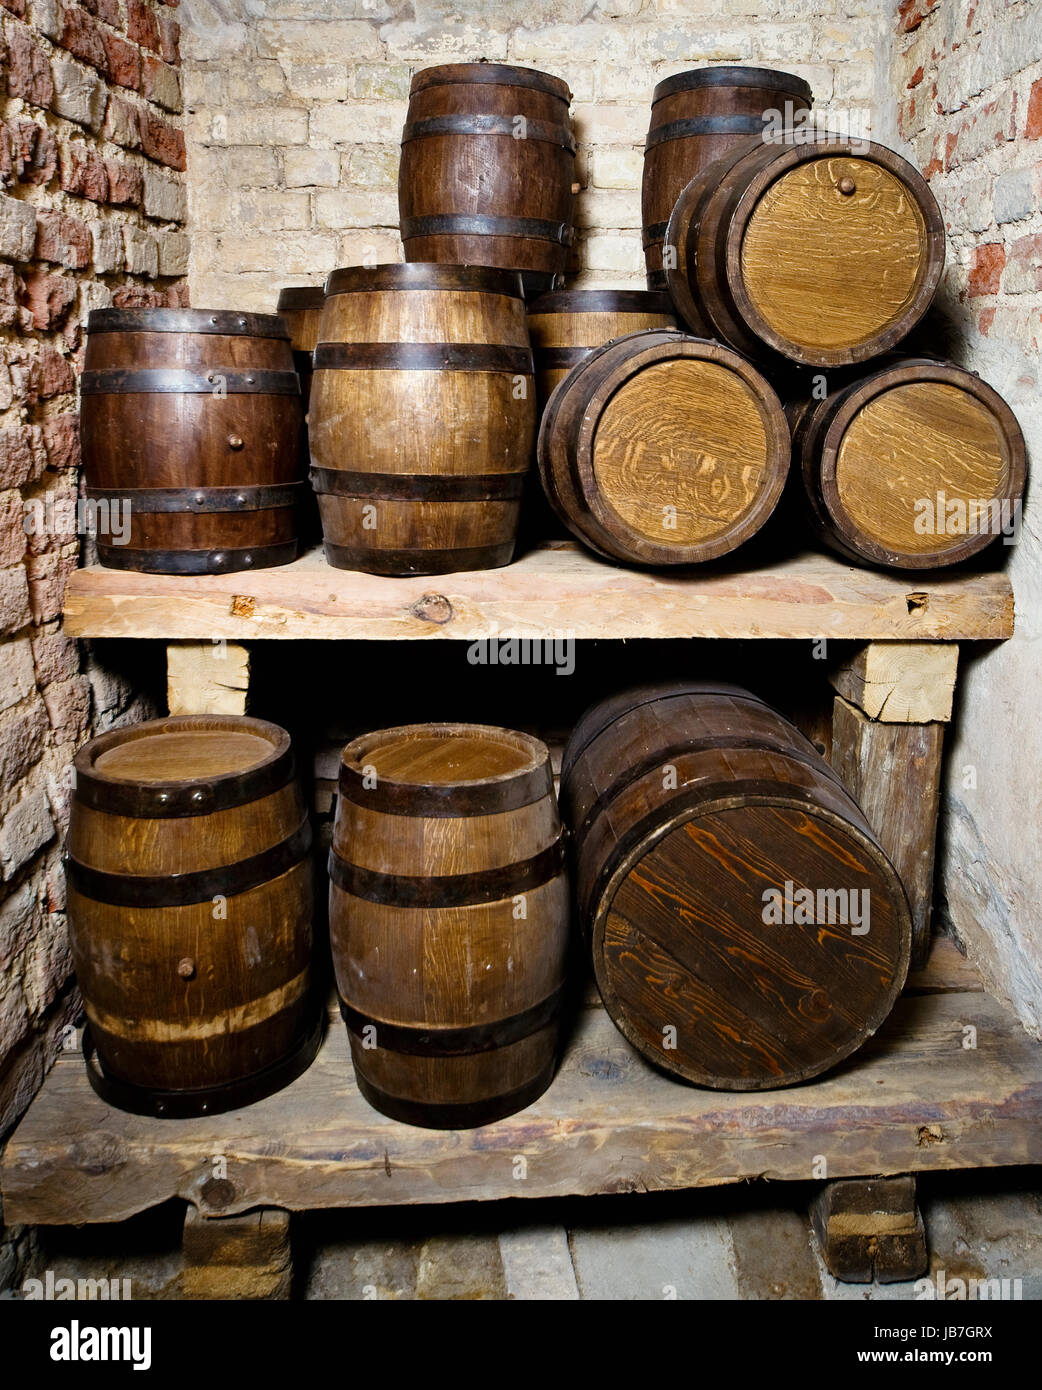 Old wine cellar with tuns Stock Photo